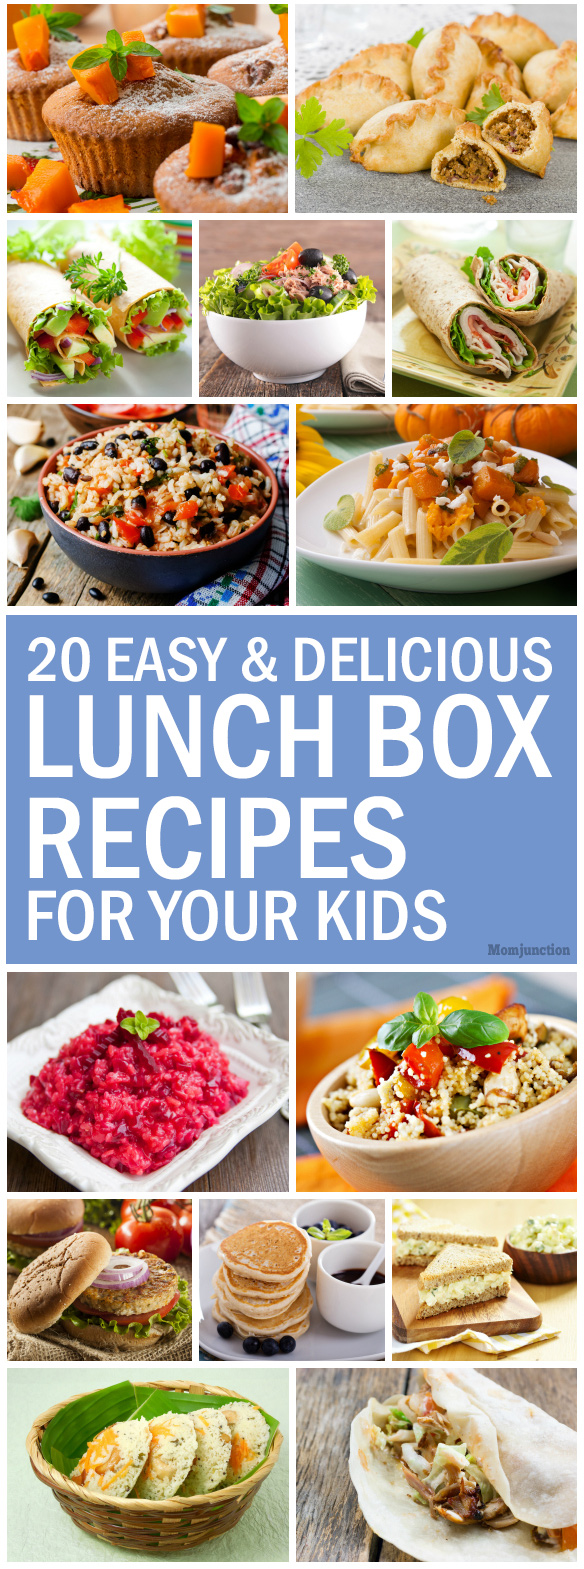 25 Healthy And Easy School Lunch Ideas For Kids